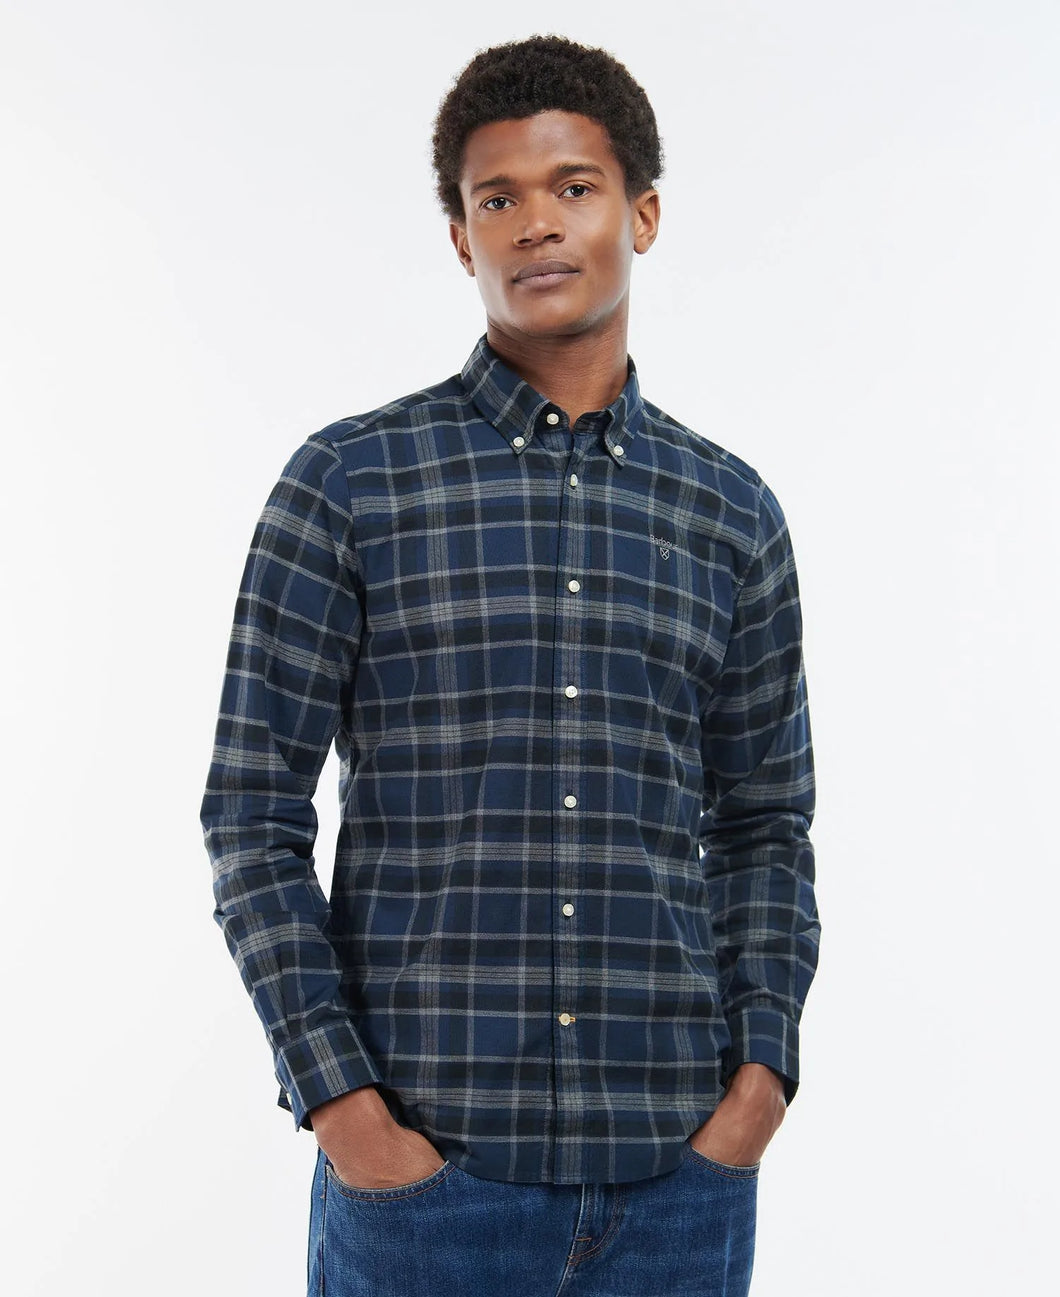 Barbour - 3XL - Helton Tailored Shirt, Navy